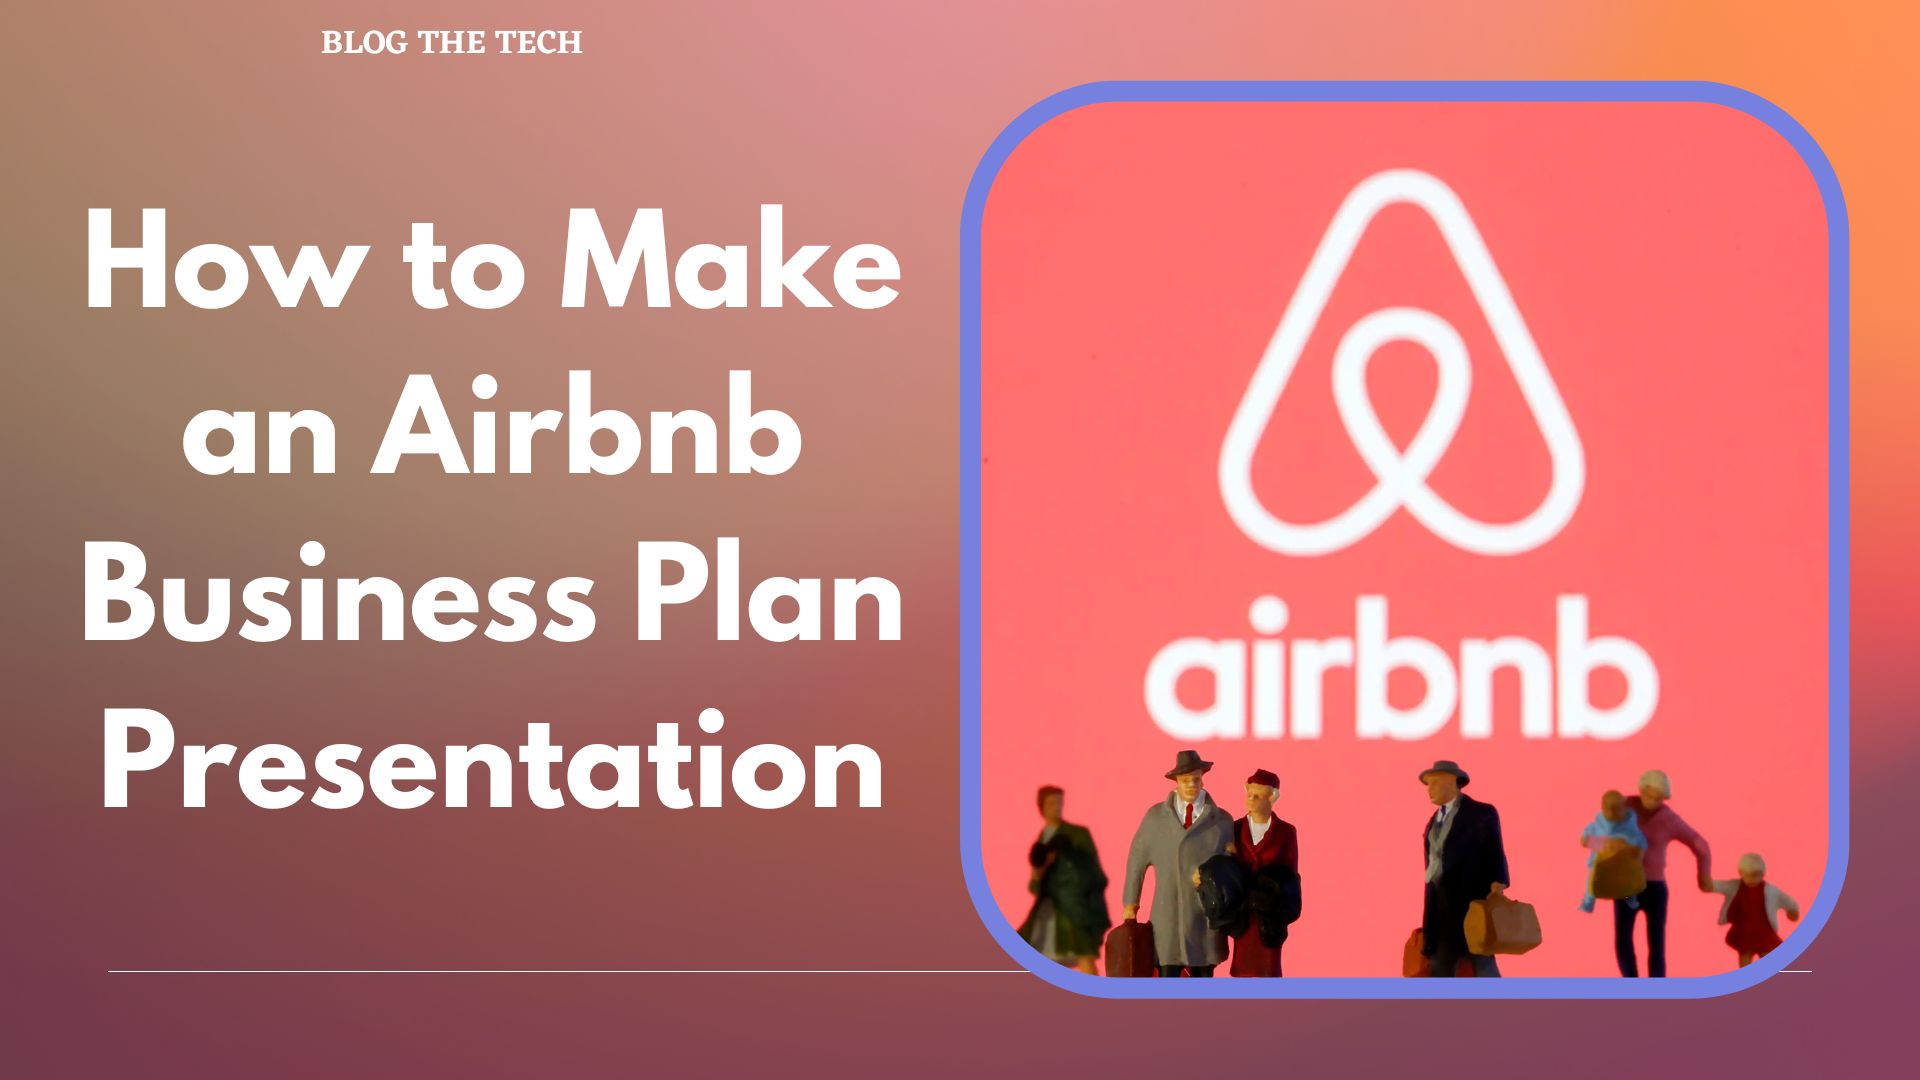 How to Make an Airbnb Business Plan Presentation